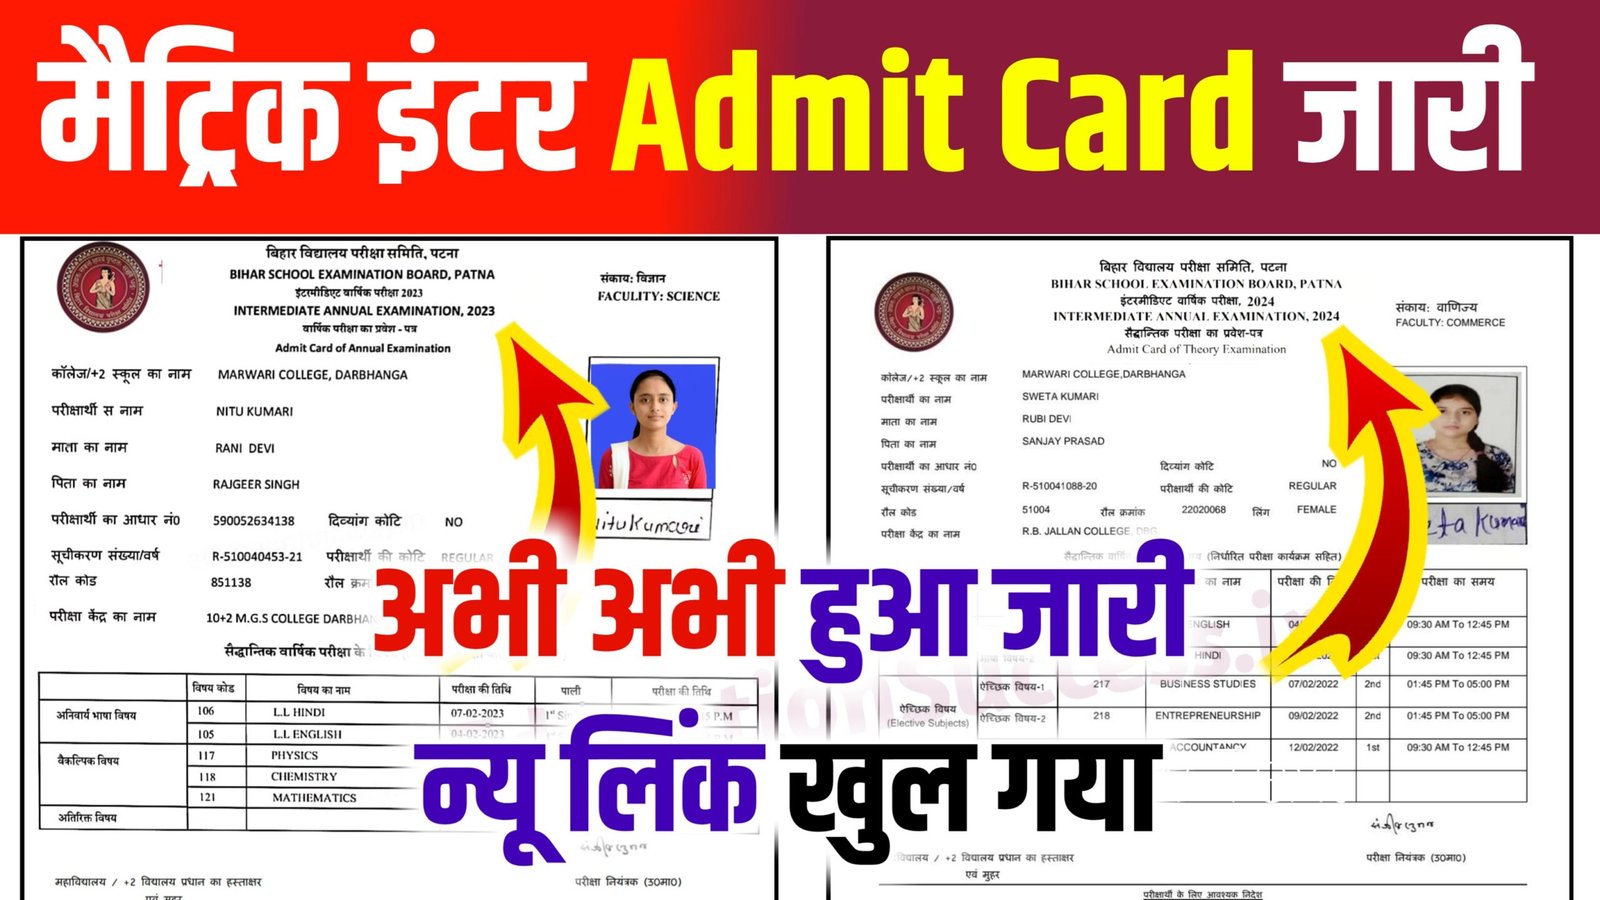 Bihar Board 10th 12th Admit Card Download Now Link Active: